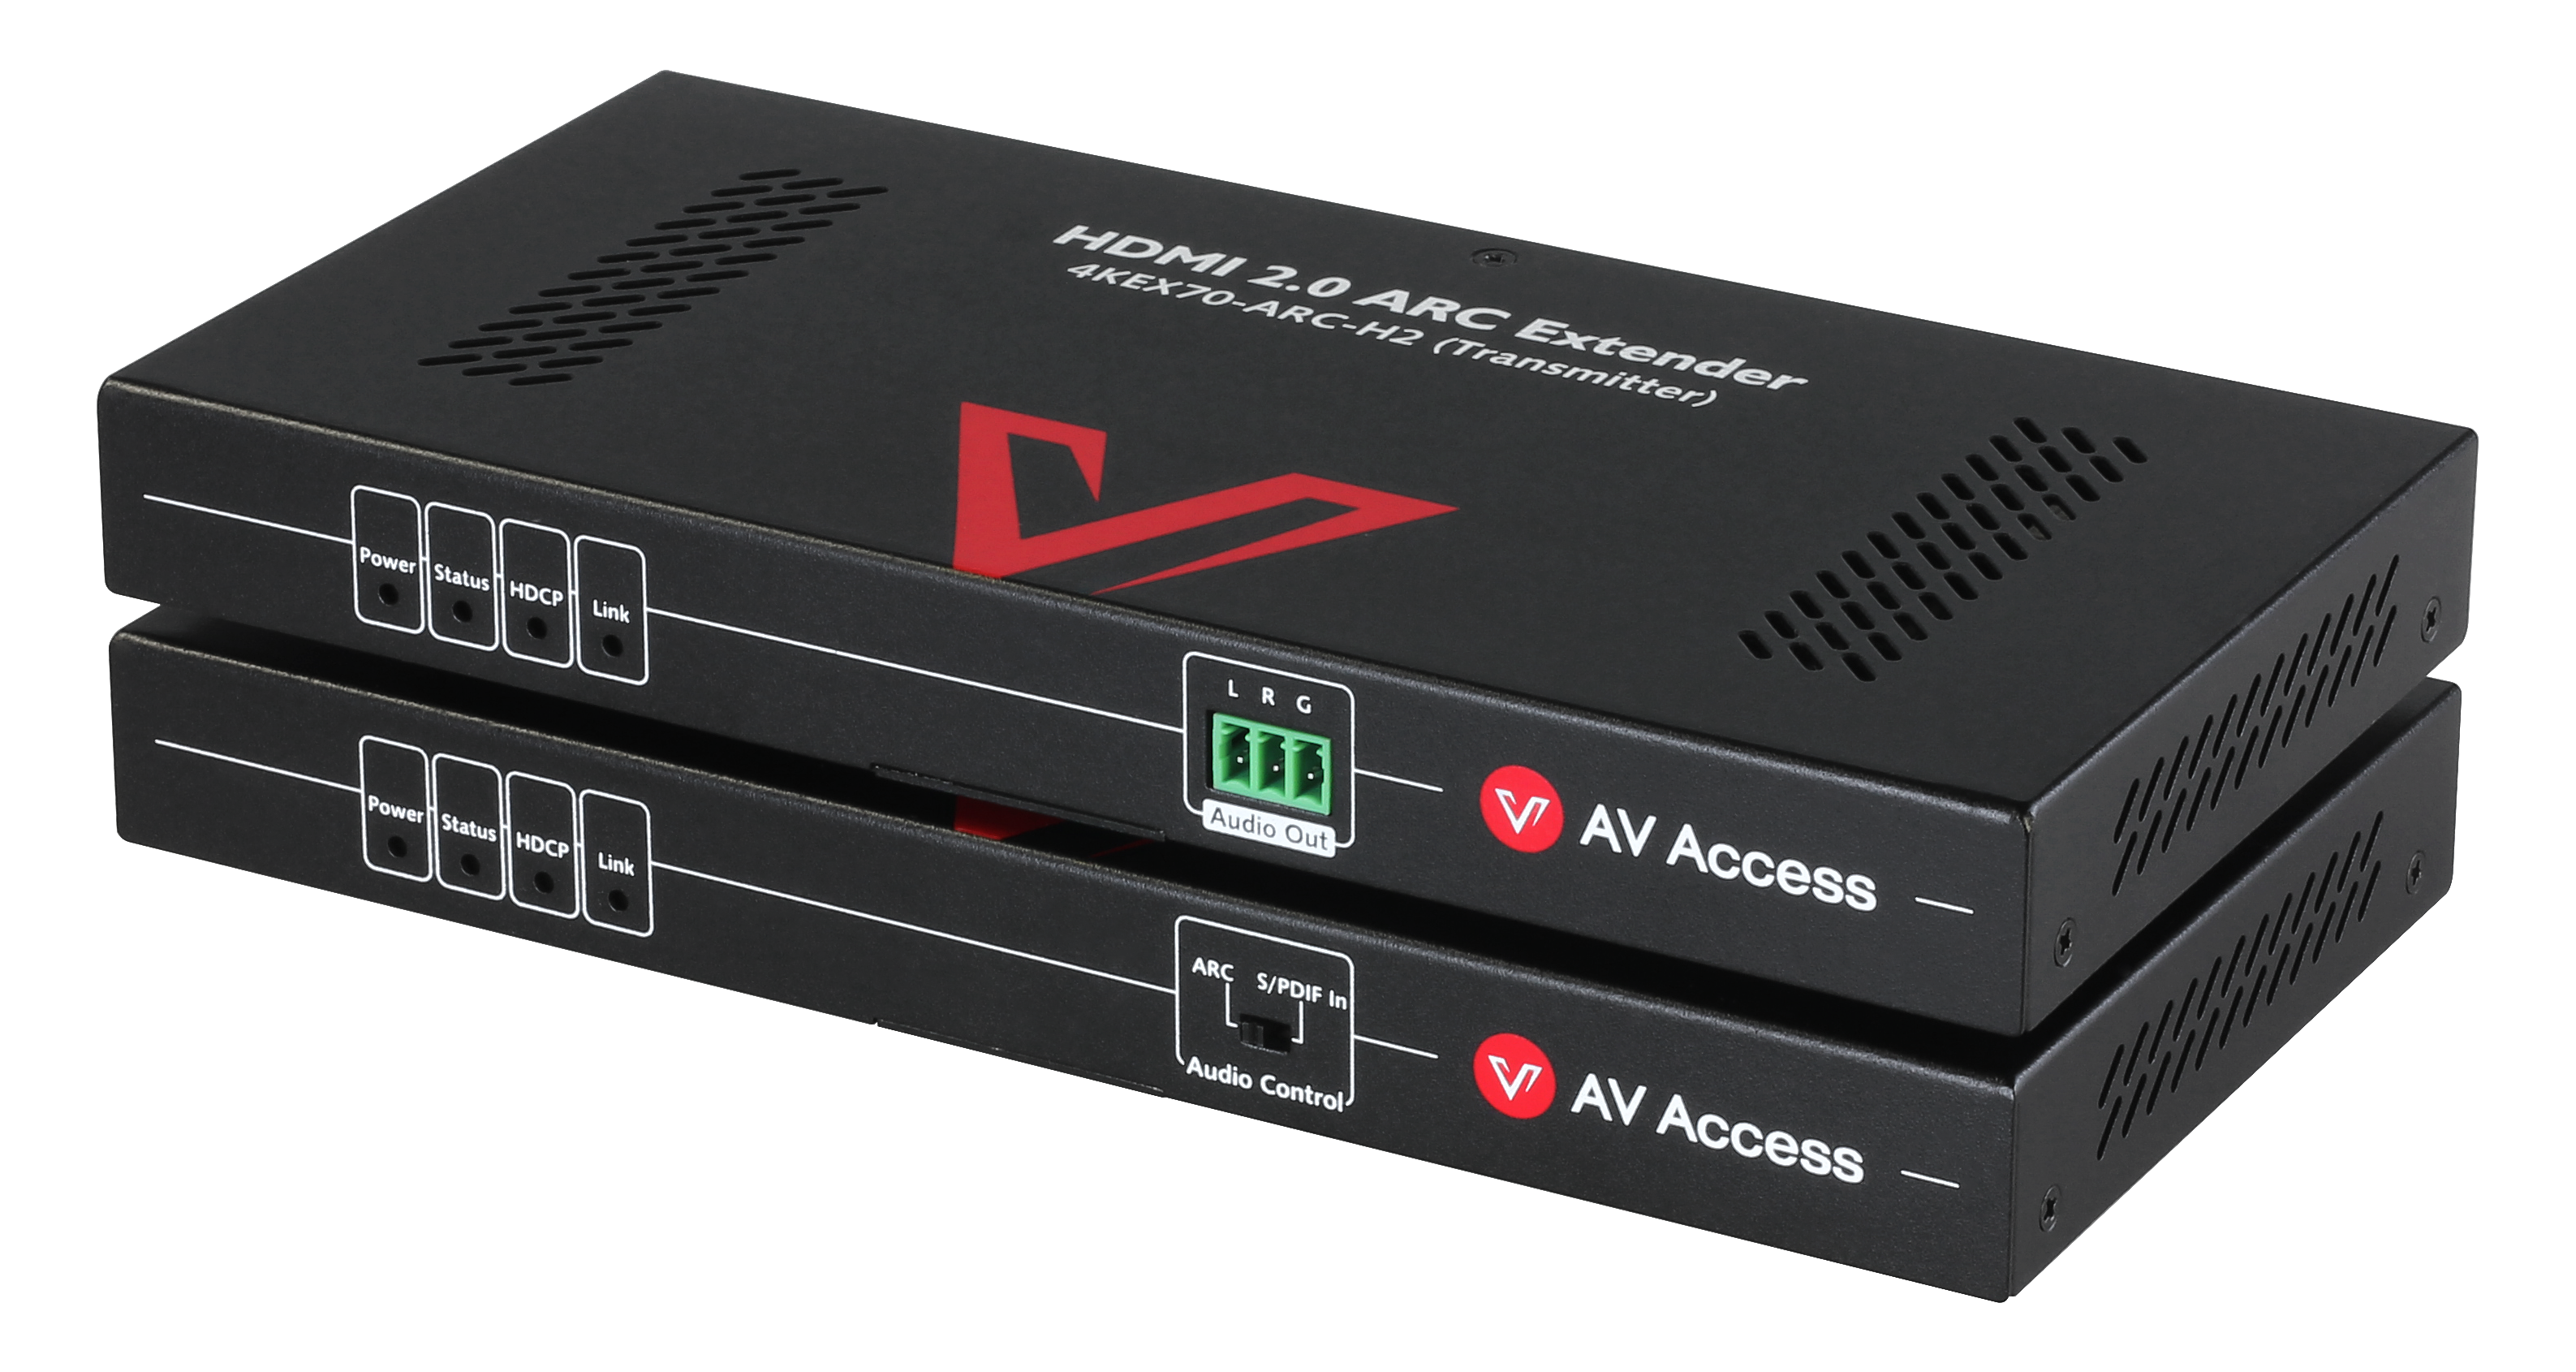 AV Access Introduces a New-Generation 4K HDMI ARC Extender to Simplify Home Theater Setup 